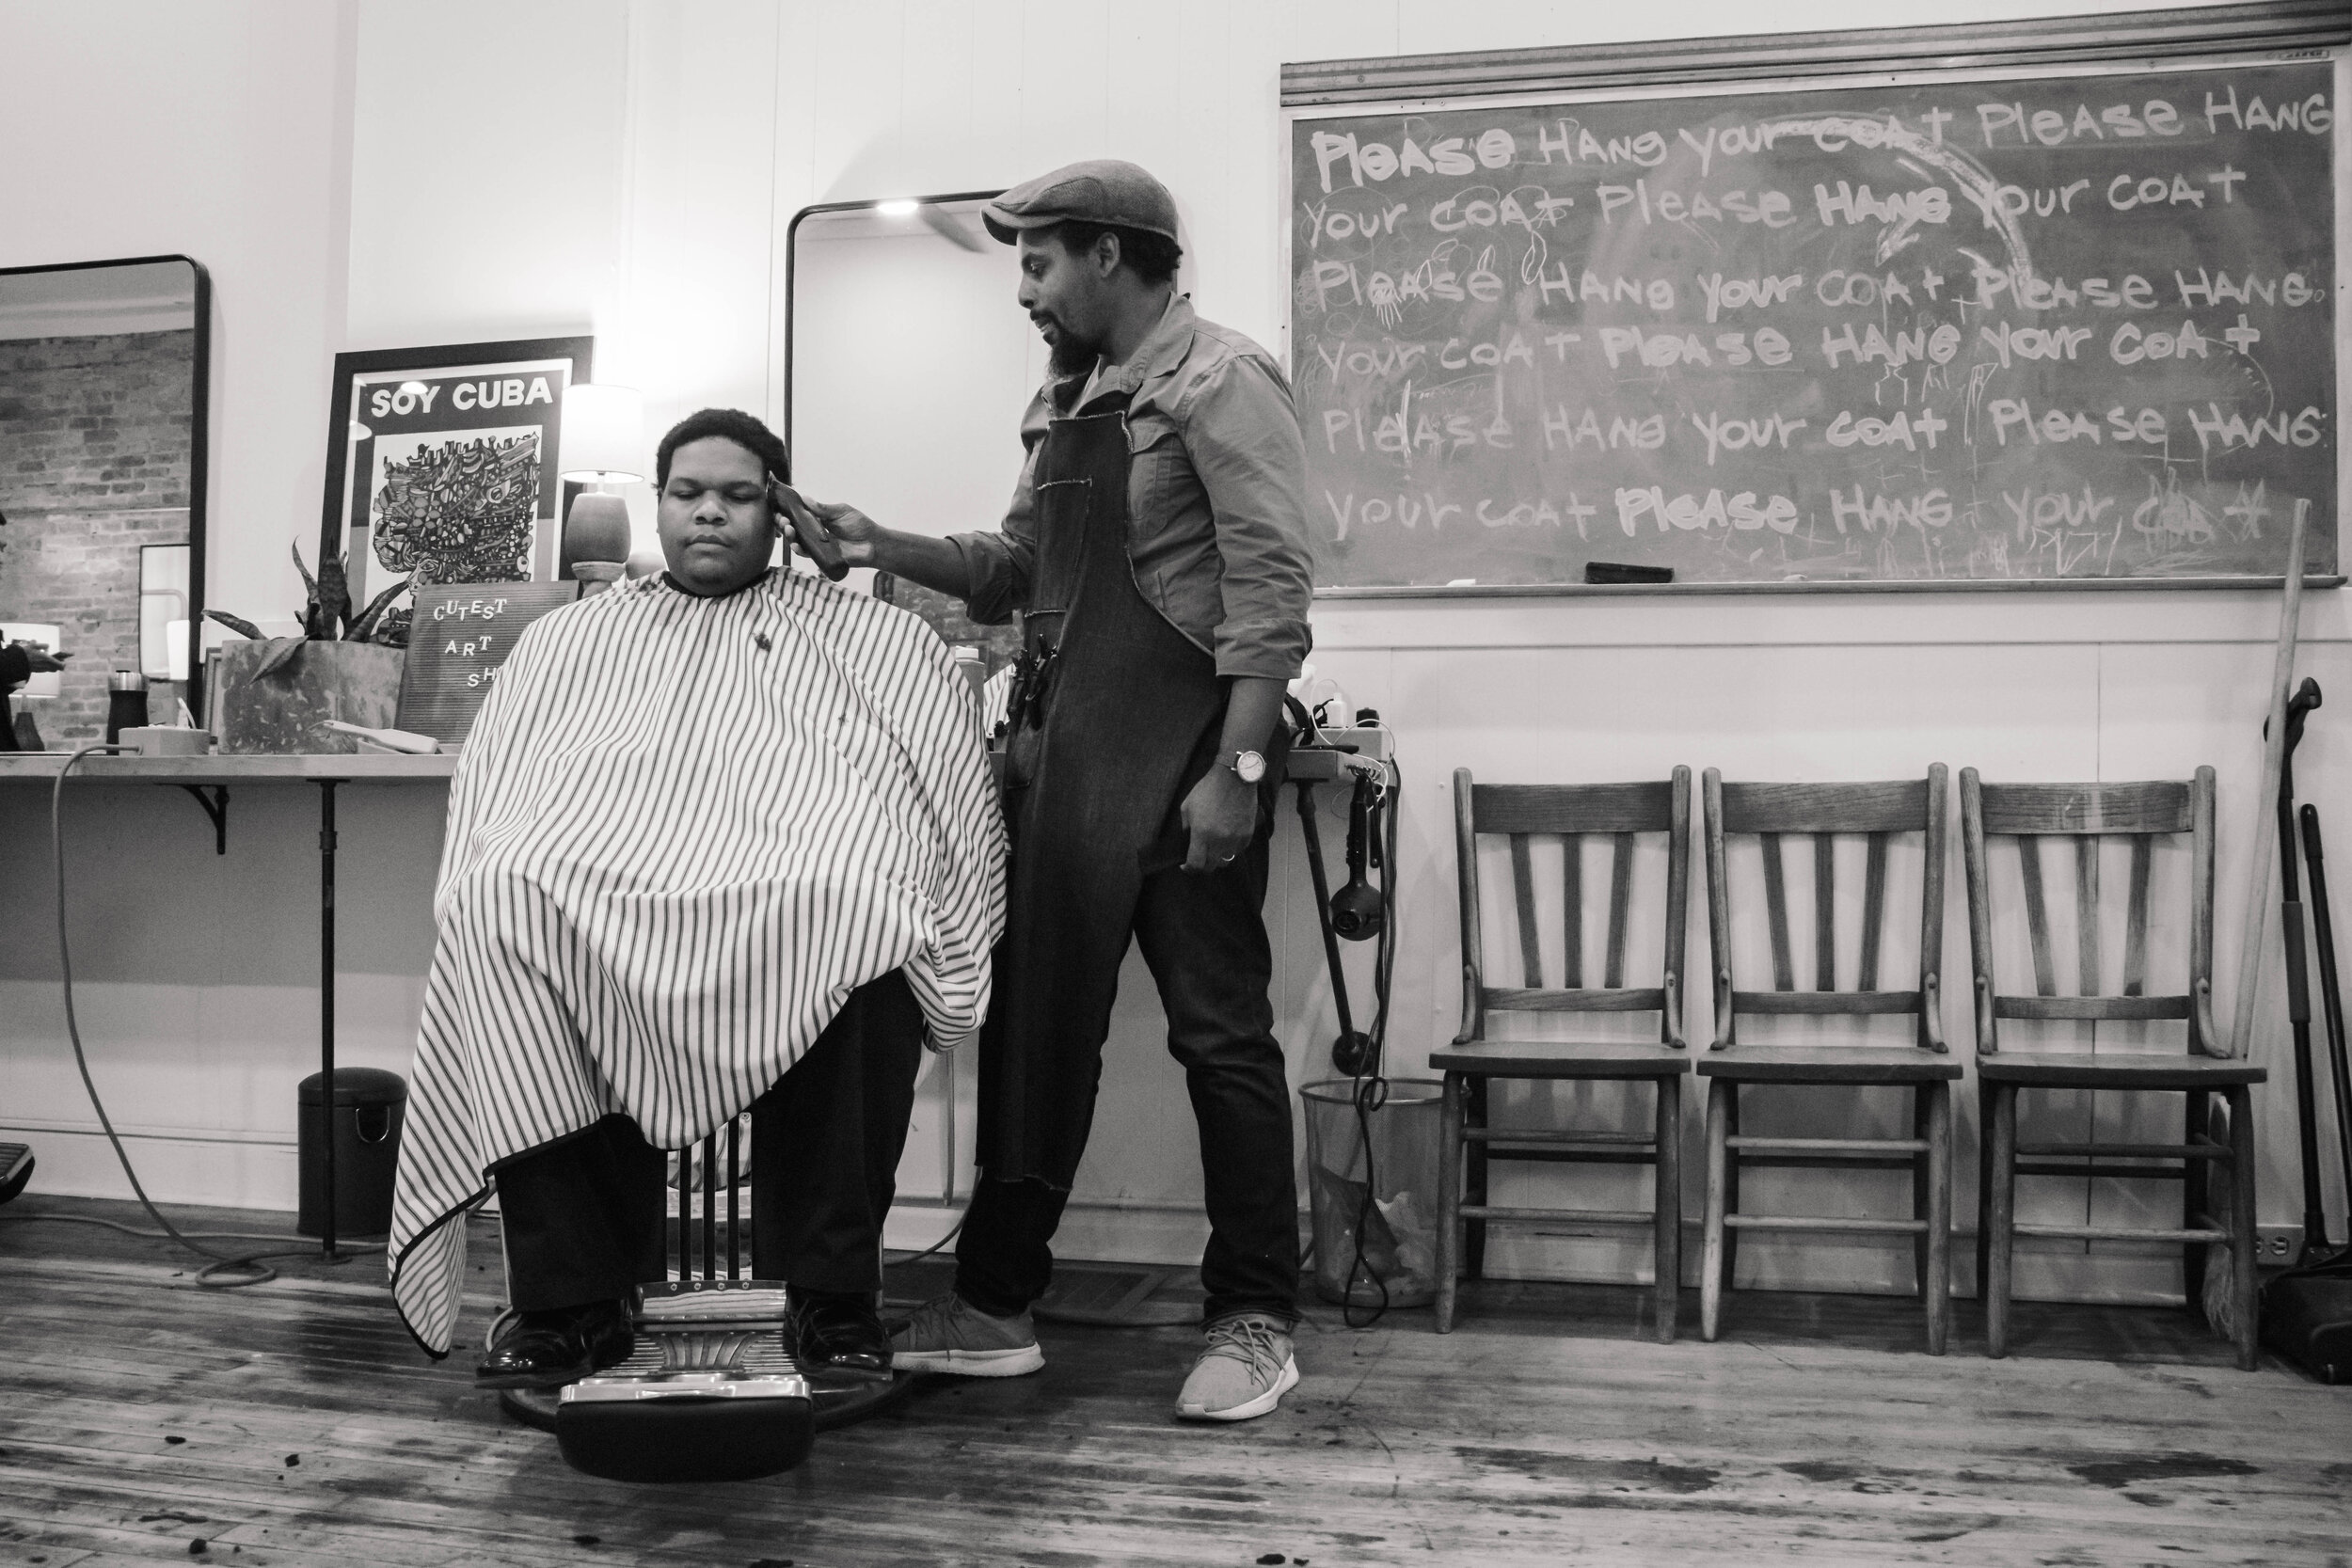  A new client sits in the chair, he just got off work and decided to stop at the barbershop before heading home.  